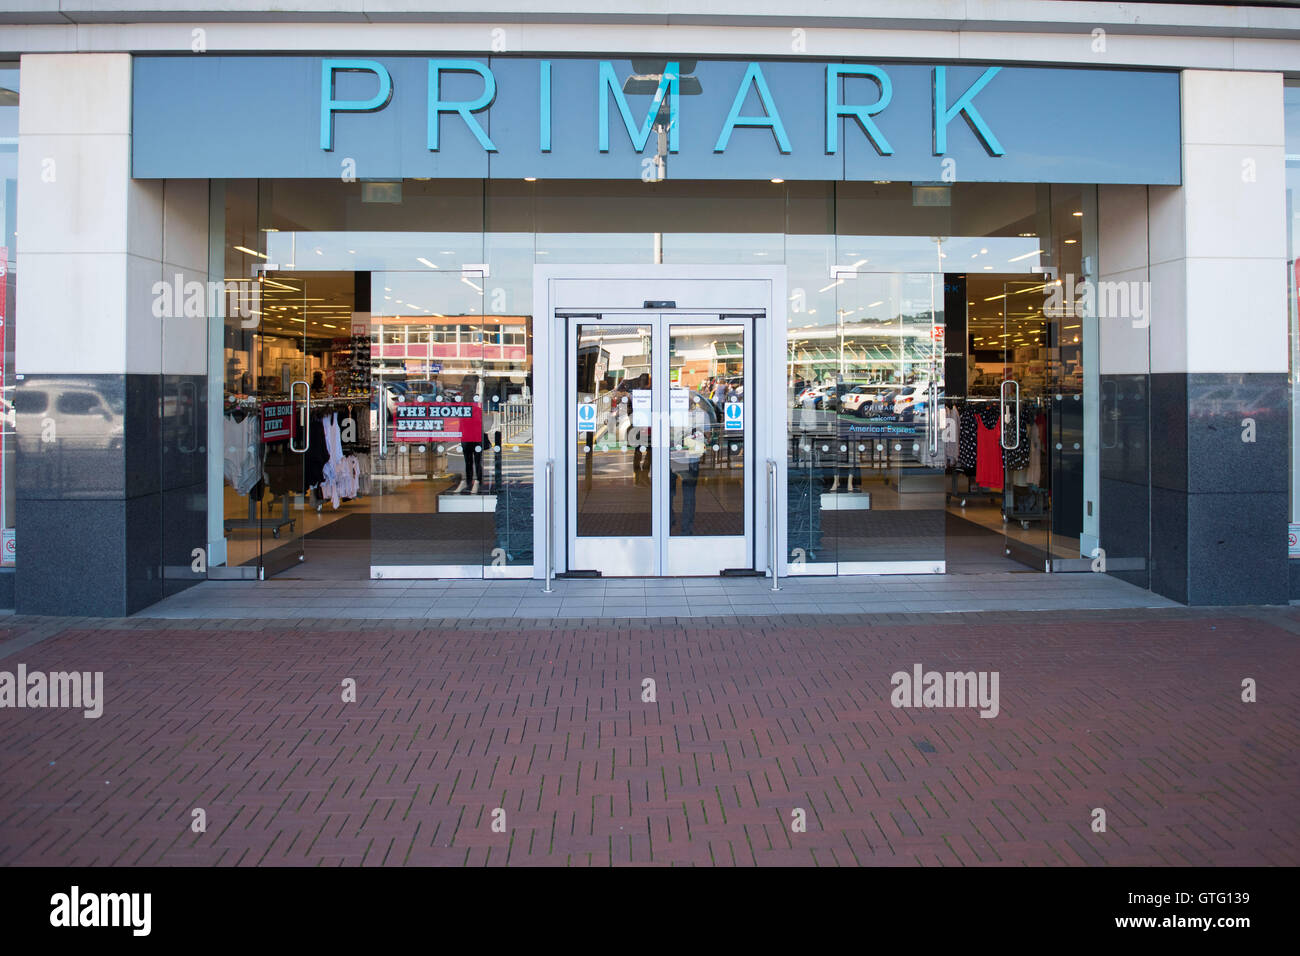 Primark budget clothes shop exterior store sign logo in Cwmbran, South Wales. Stock Photo